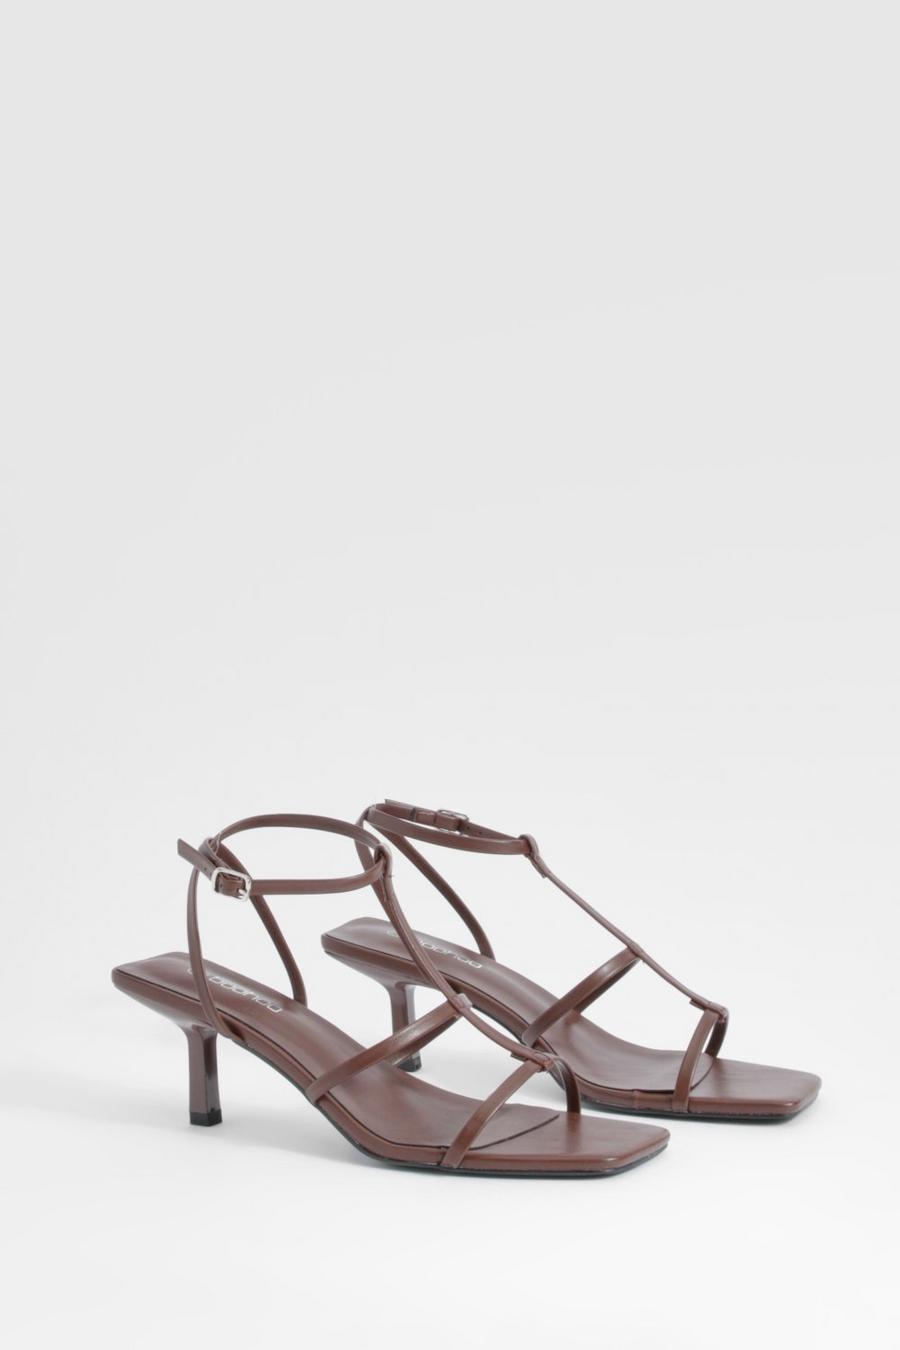 Chocolate Square Toe Low Caged Heels